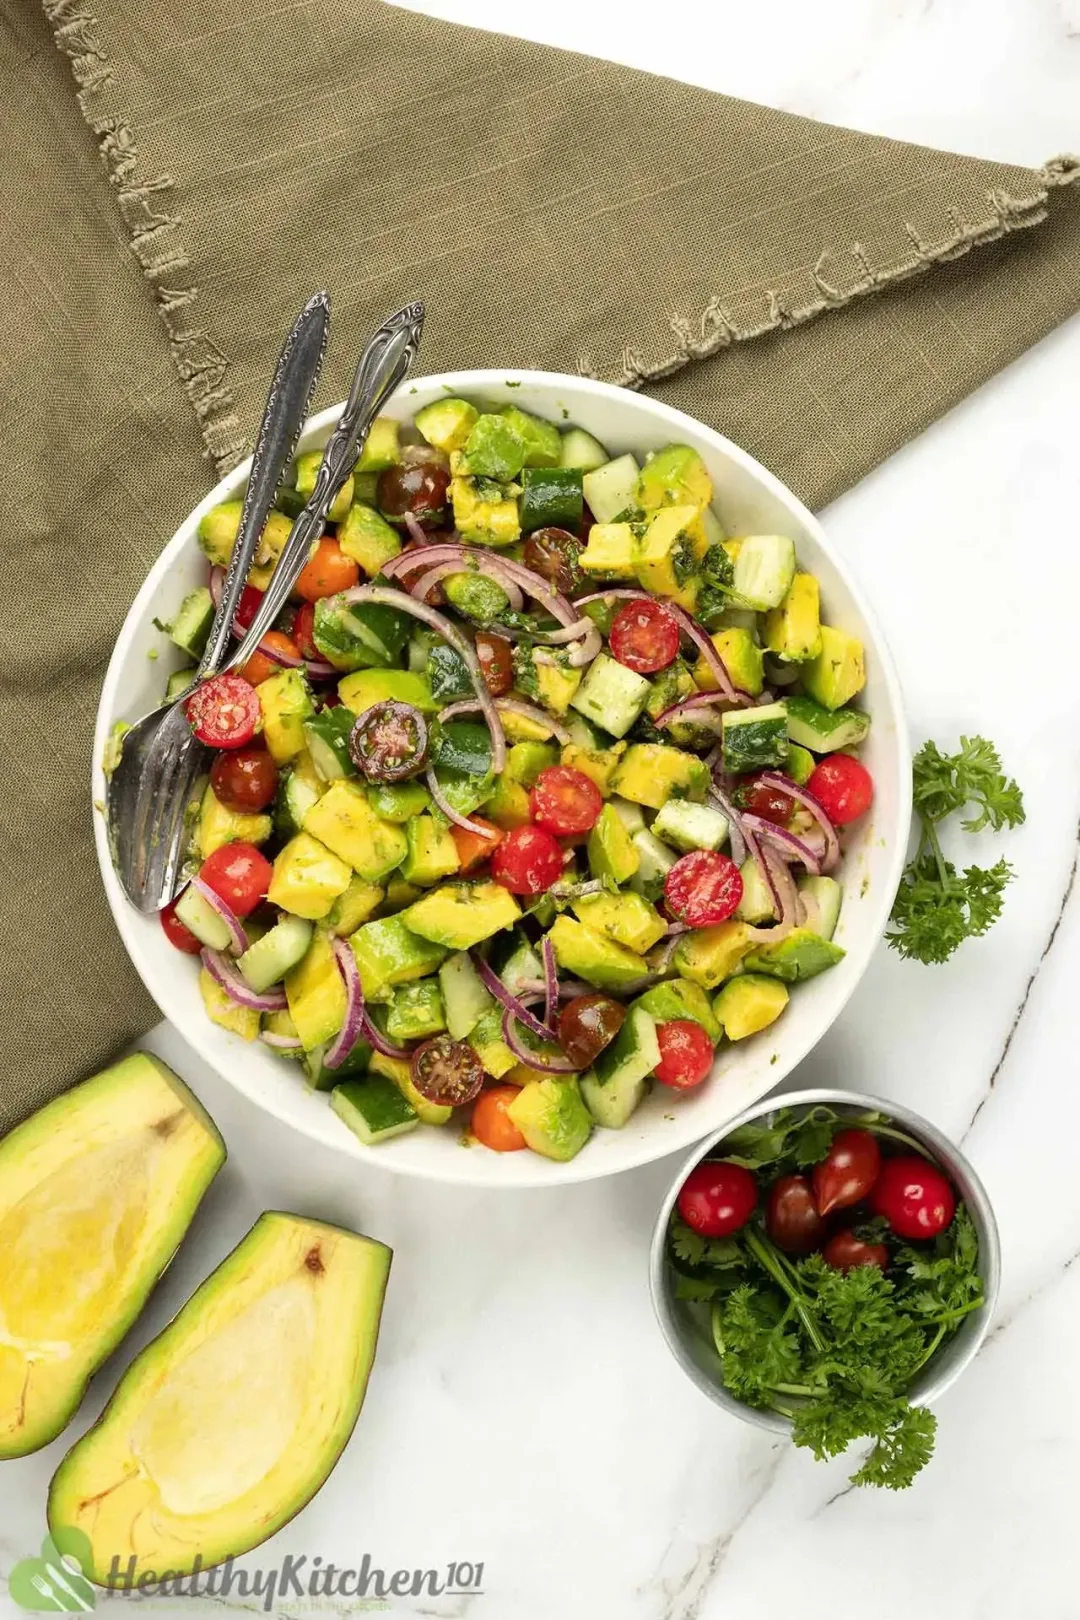 HomeGrown Wichita - Have you tried our popular Avocado Fresco Salad, tossed  in our housemade creamy avocado, jalapeno dressing? We'll be introducing  our fall seasonal flavors soon, so hurry in to taste